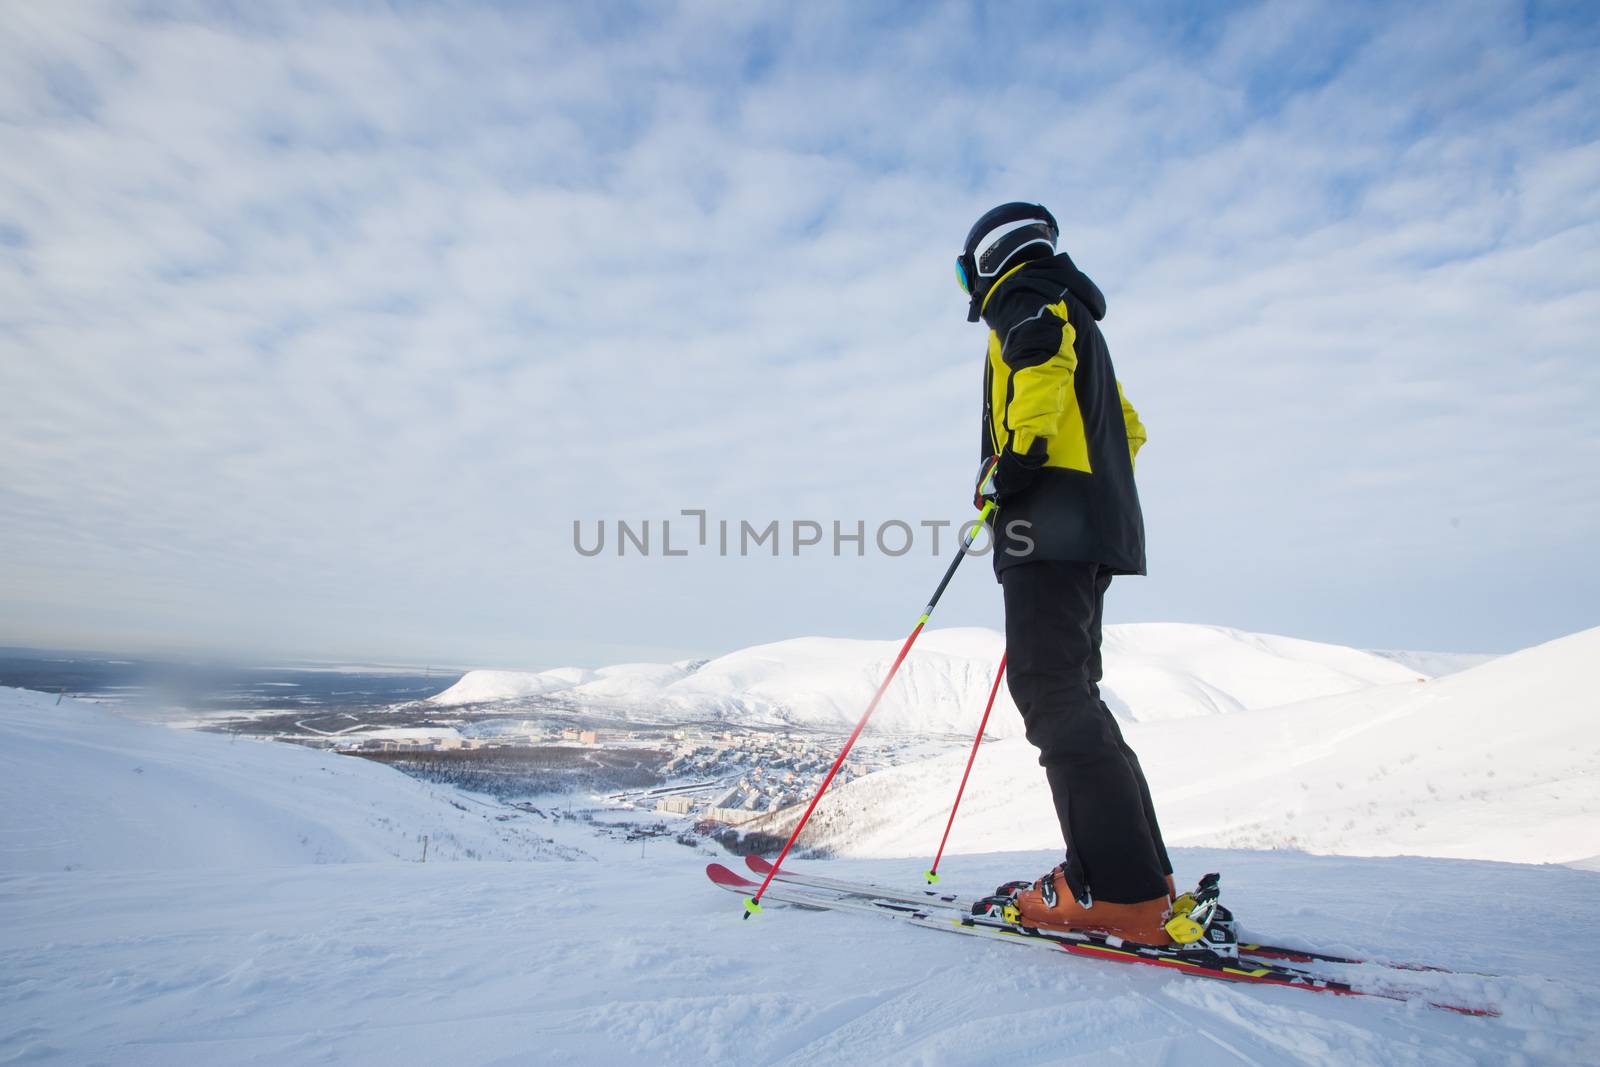 Kirovsk, Russia - Skier on piste in high mountains on ski slope. Rear view. Winter snowboard and skiing concept. Khibiny Mountains, Kola Peninsula panoramic view in town